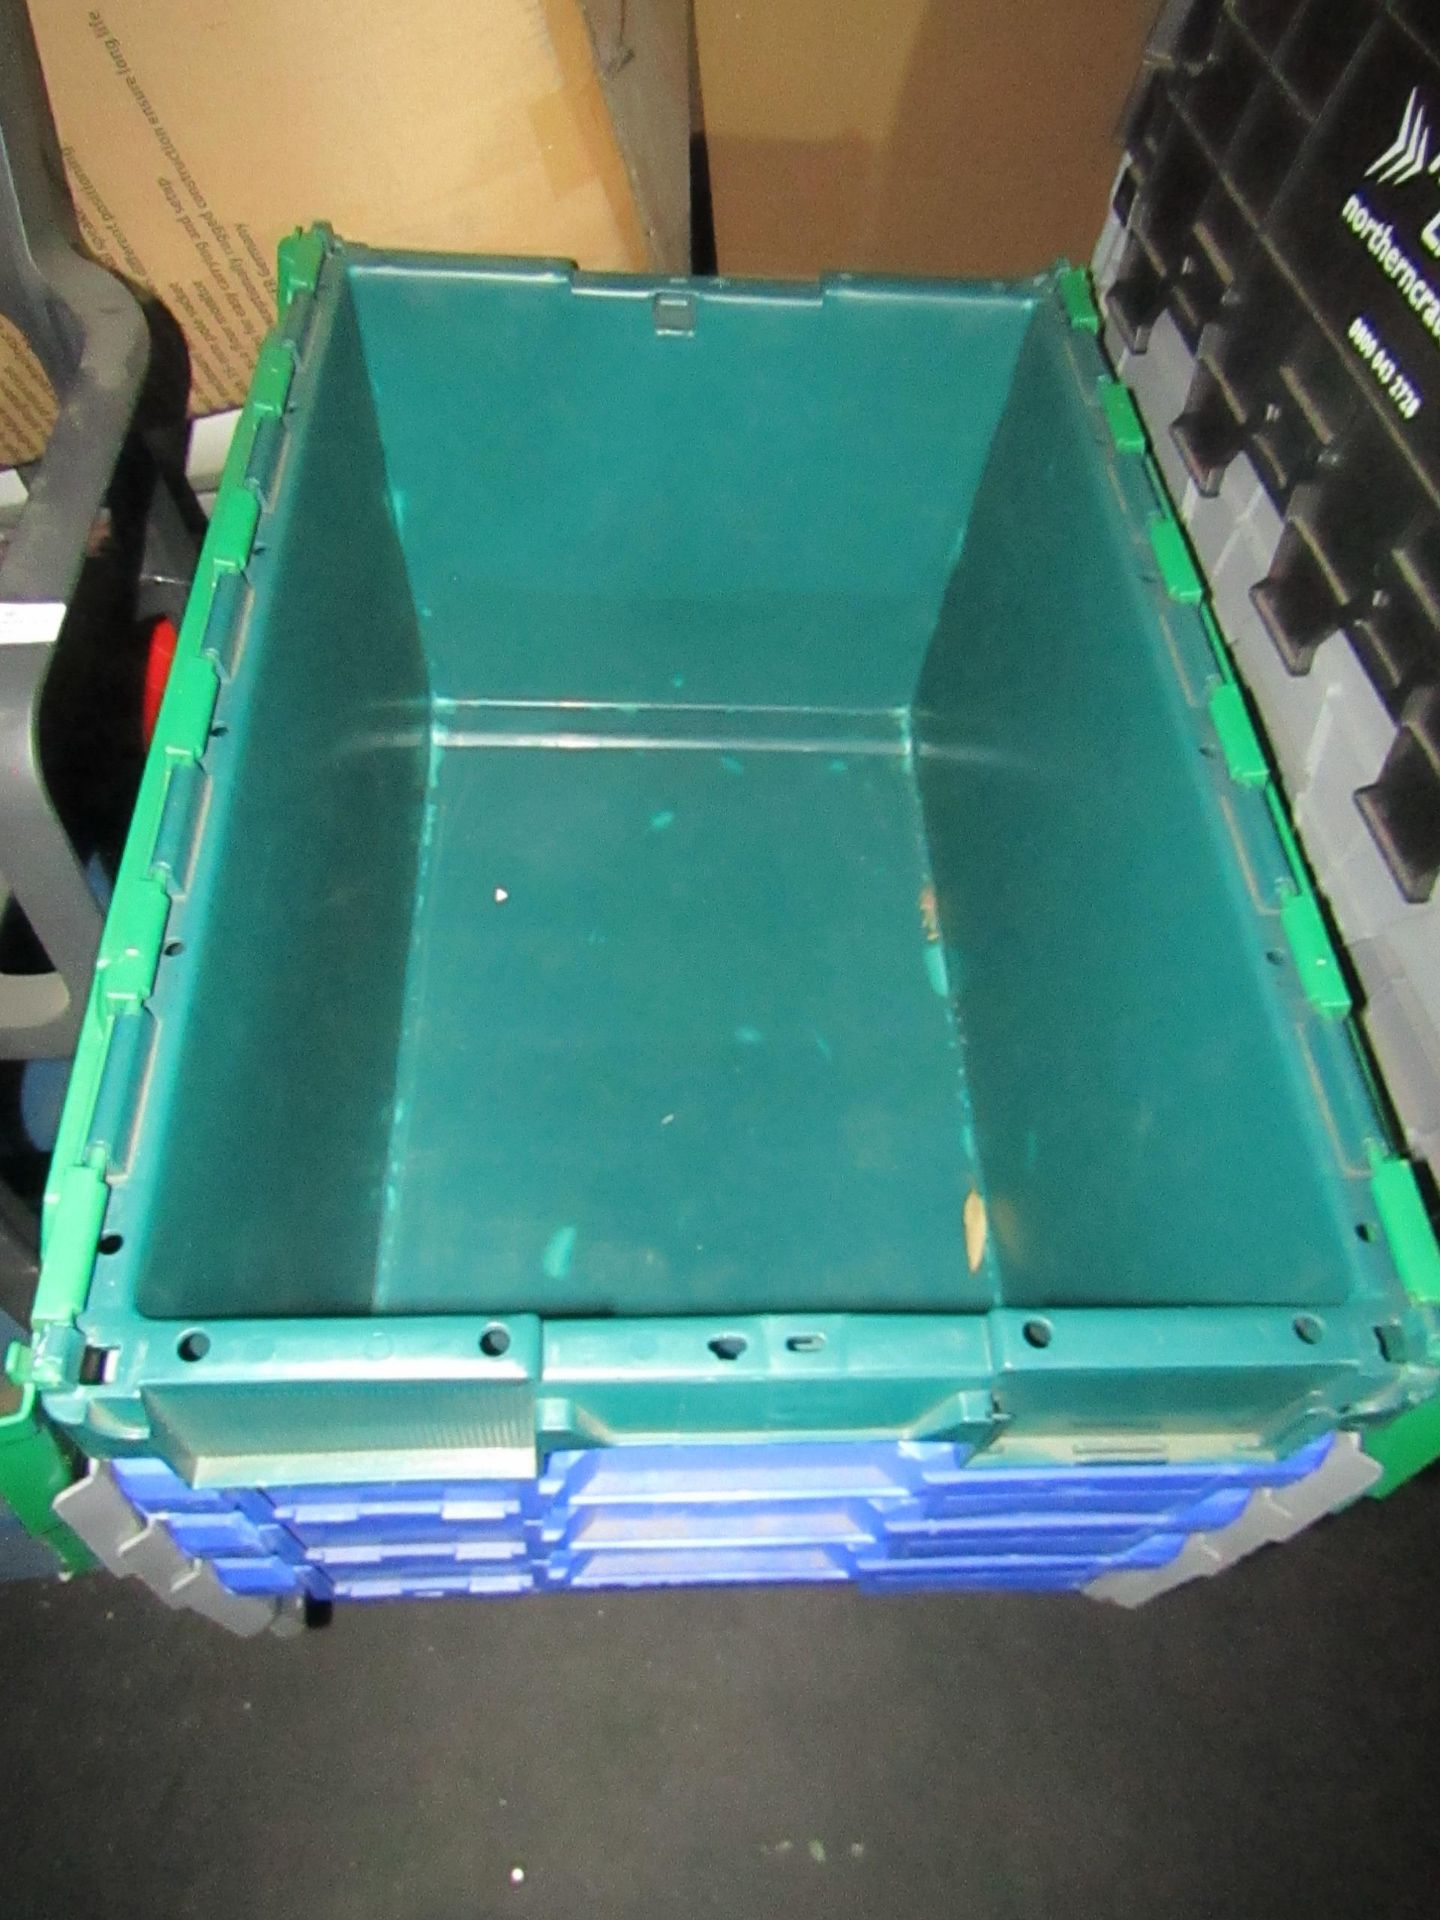 1x Large Plastic Crate Box - Vary Uses - Used Condition.